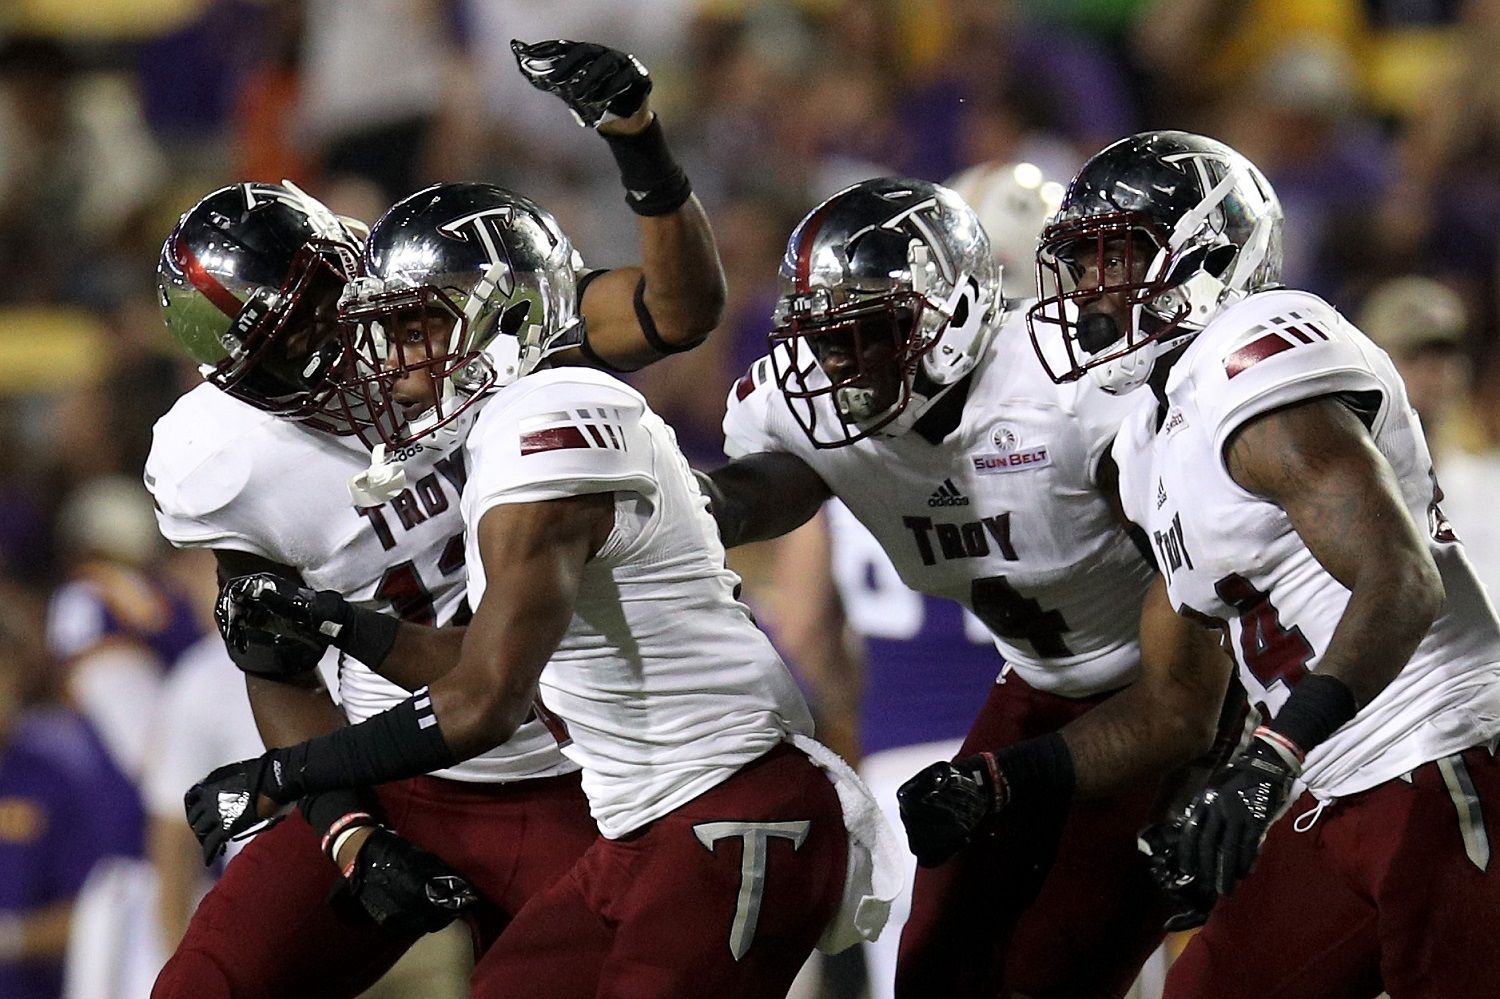 BATON ROUGE, LA - SEPTEMBER 30:  Members of the Troy Trojans react after an interception against the LSU Tigers at Tiger Stadium on September 30, 2017 in Baton Rouge, Louisiana.  (Photo by Chris Graythen/Getty Images)